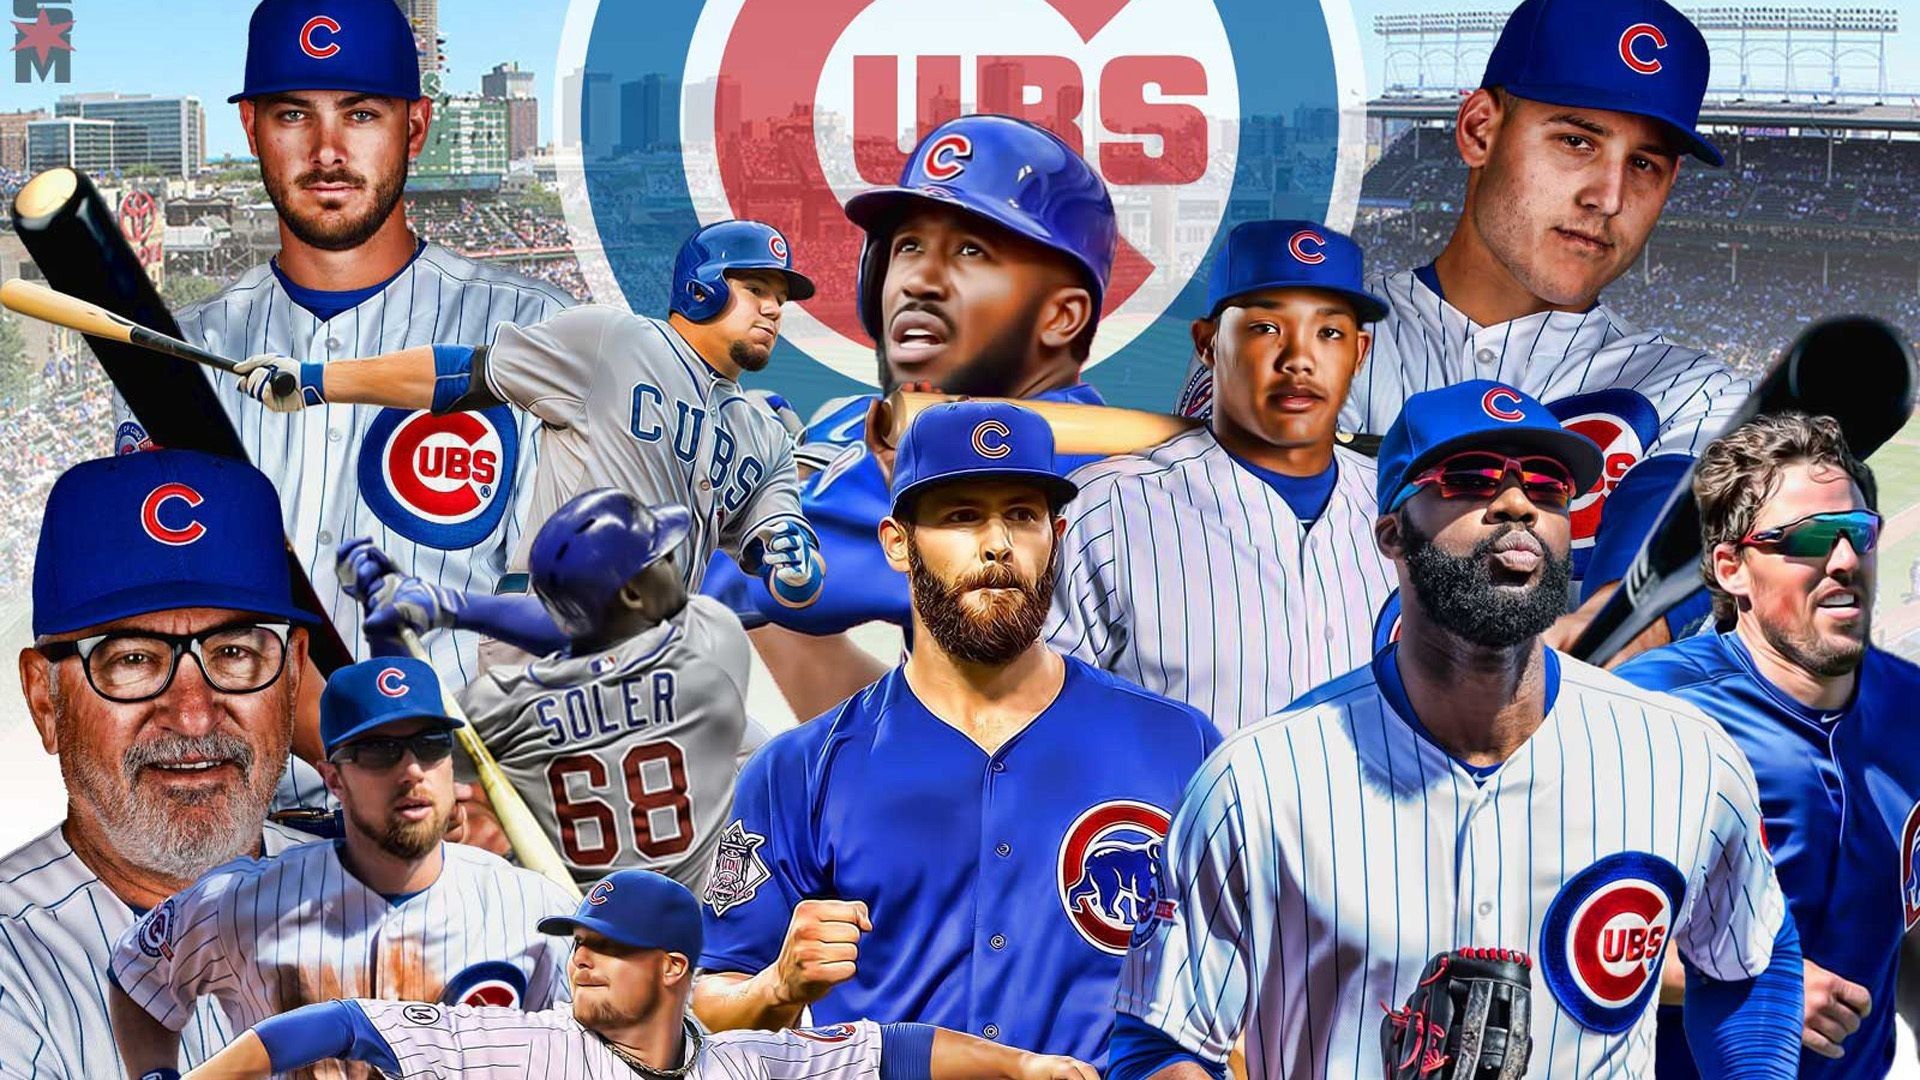 1280x1024 / 1280x1024 chicago cubs wallpaper for computer -  Coolwallpapers.me!